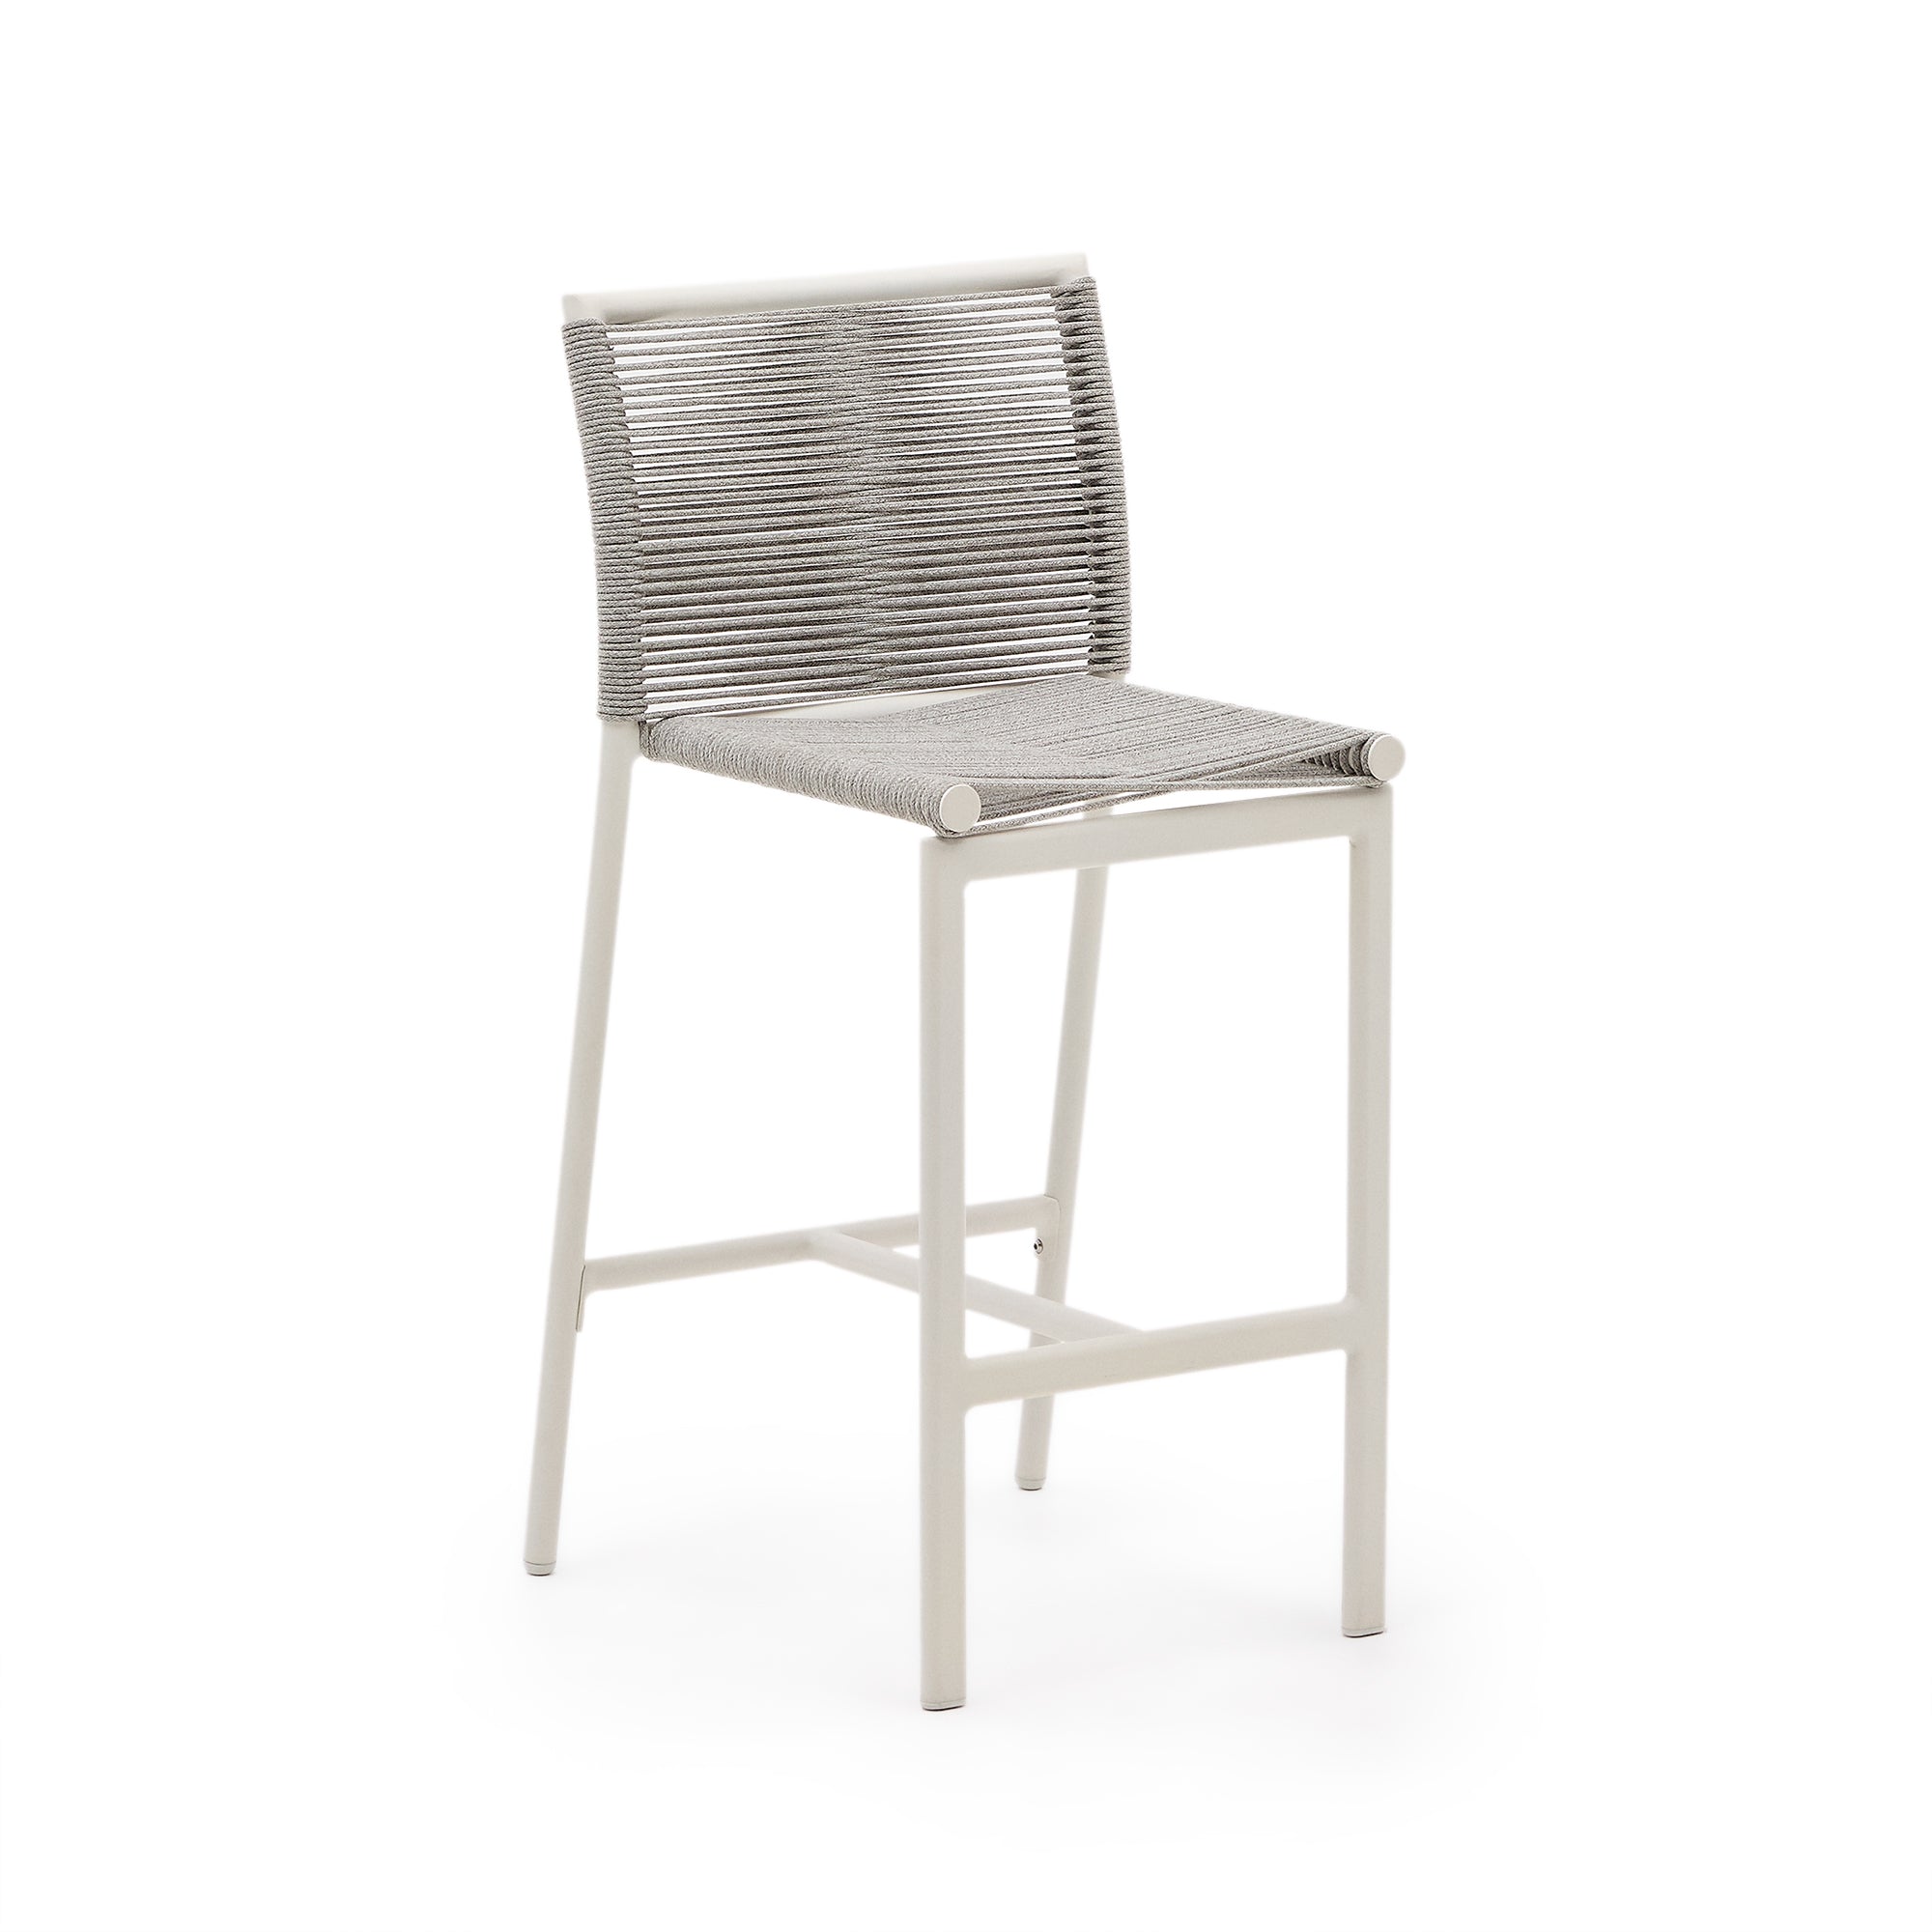 Culip outdoor chair made of rope and white aluminum, 65 cm